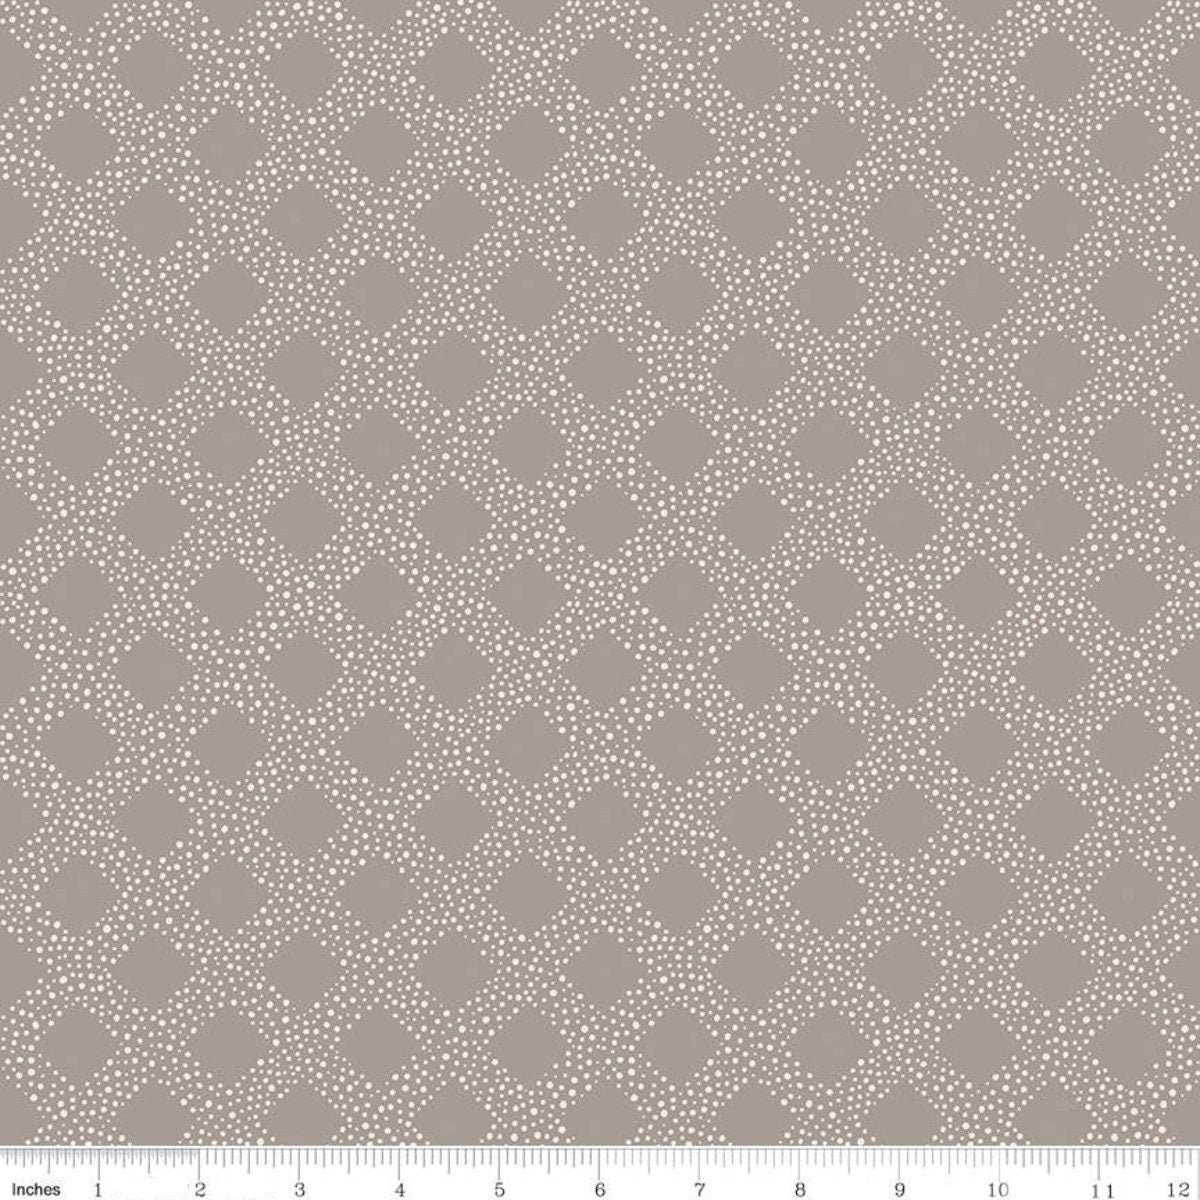 LAMINATED cotton fabric - Harmony Lattice Gray (sold continuous by the half yard) Basic, Food Safe Fabric, BPA free